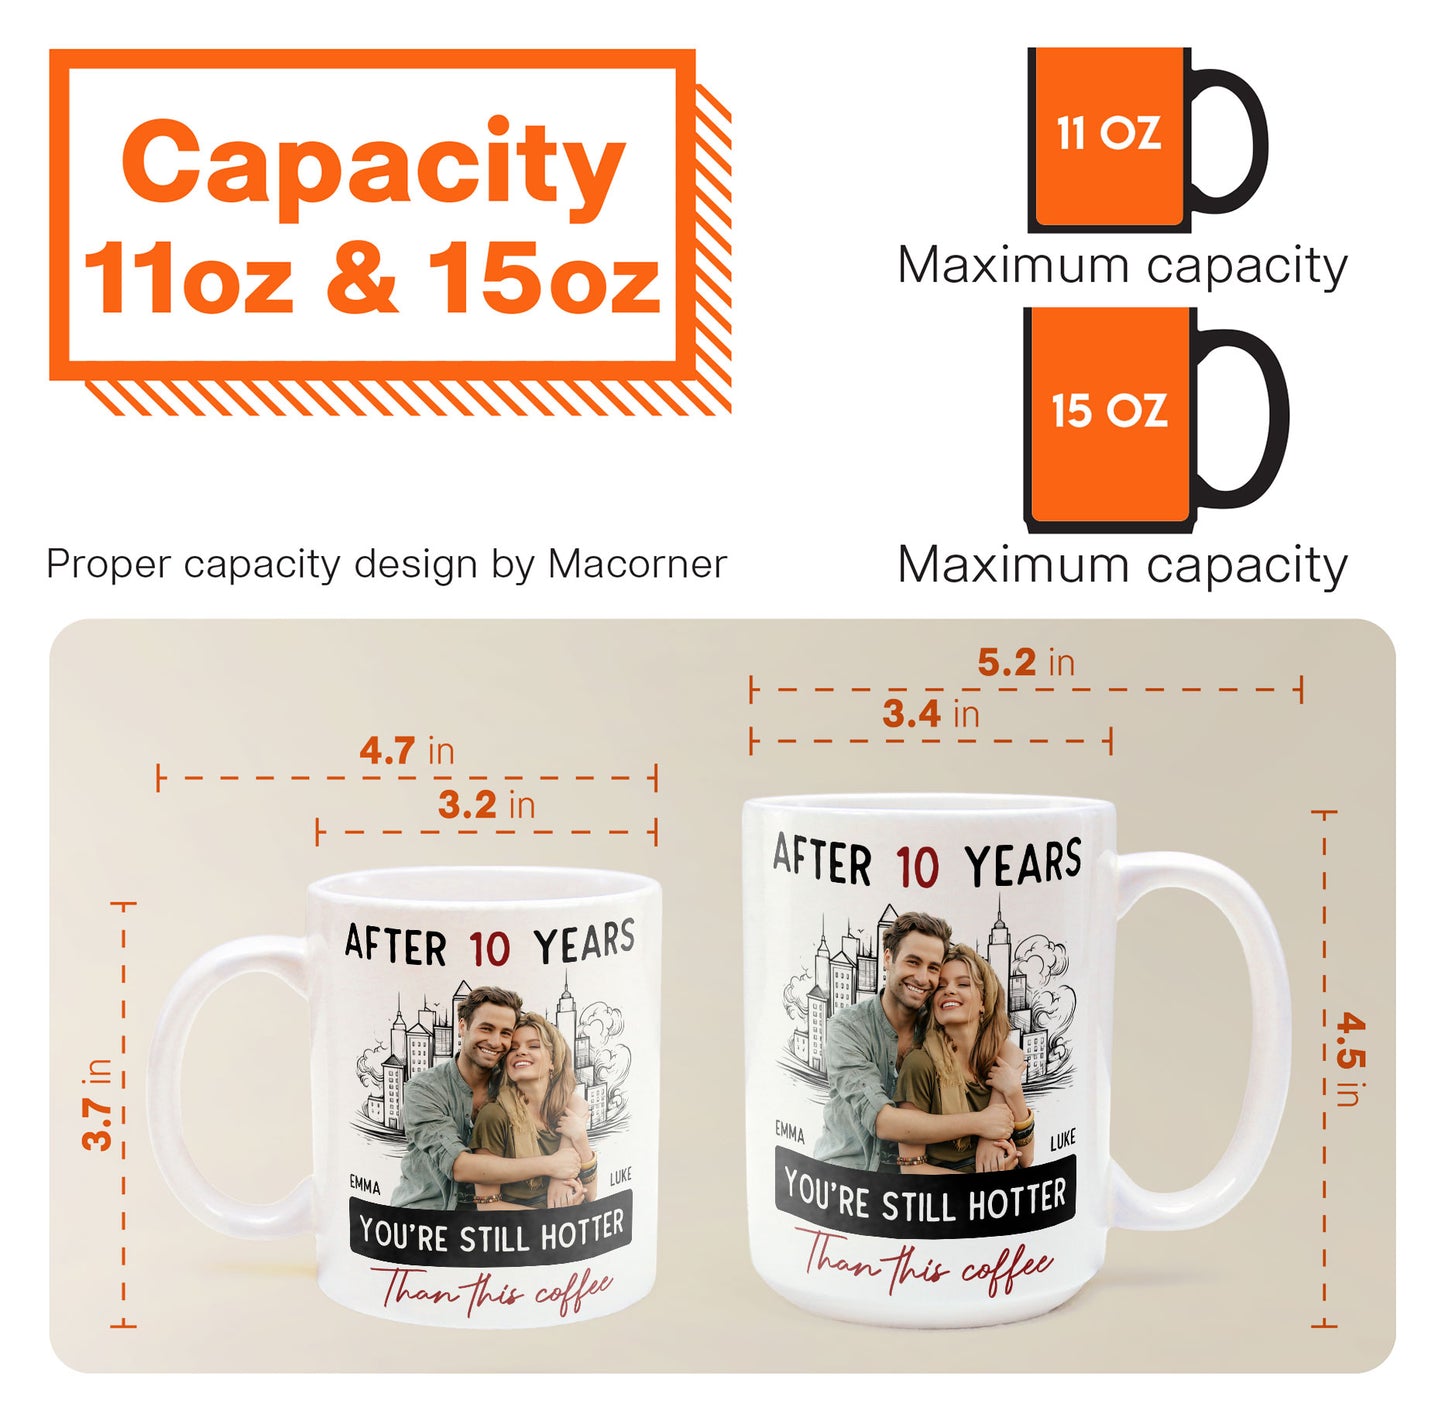 After Years You're Still Hotter Than This Coffee - Personalized Photo Mug